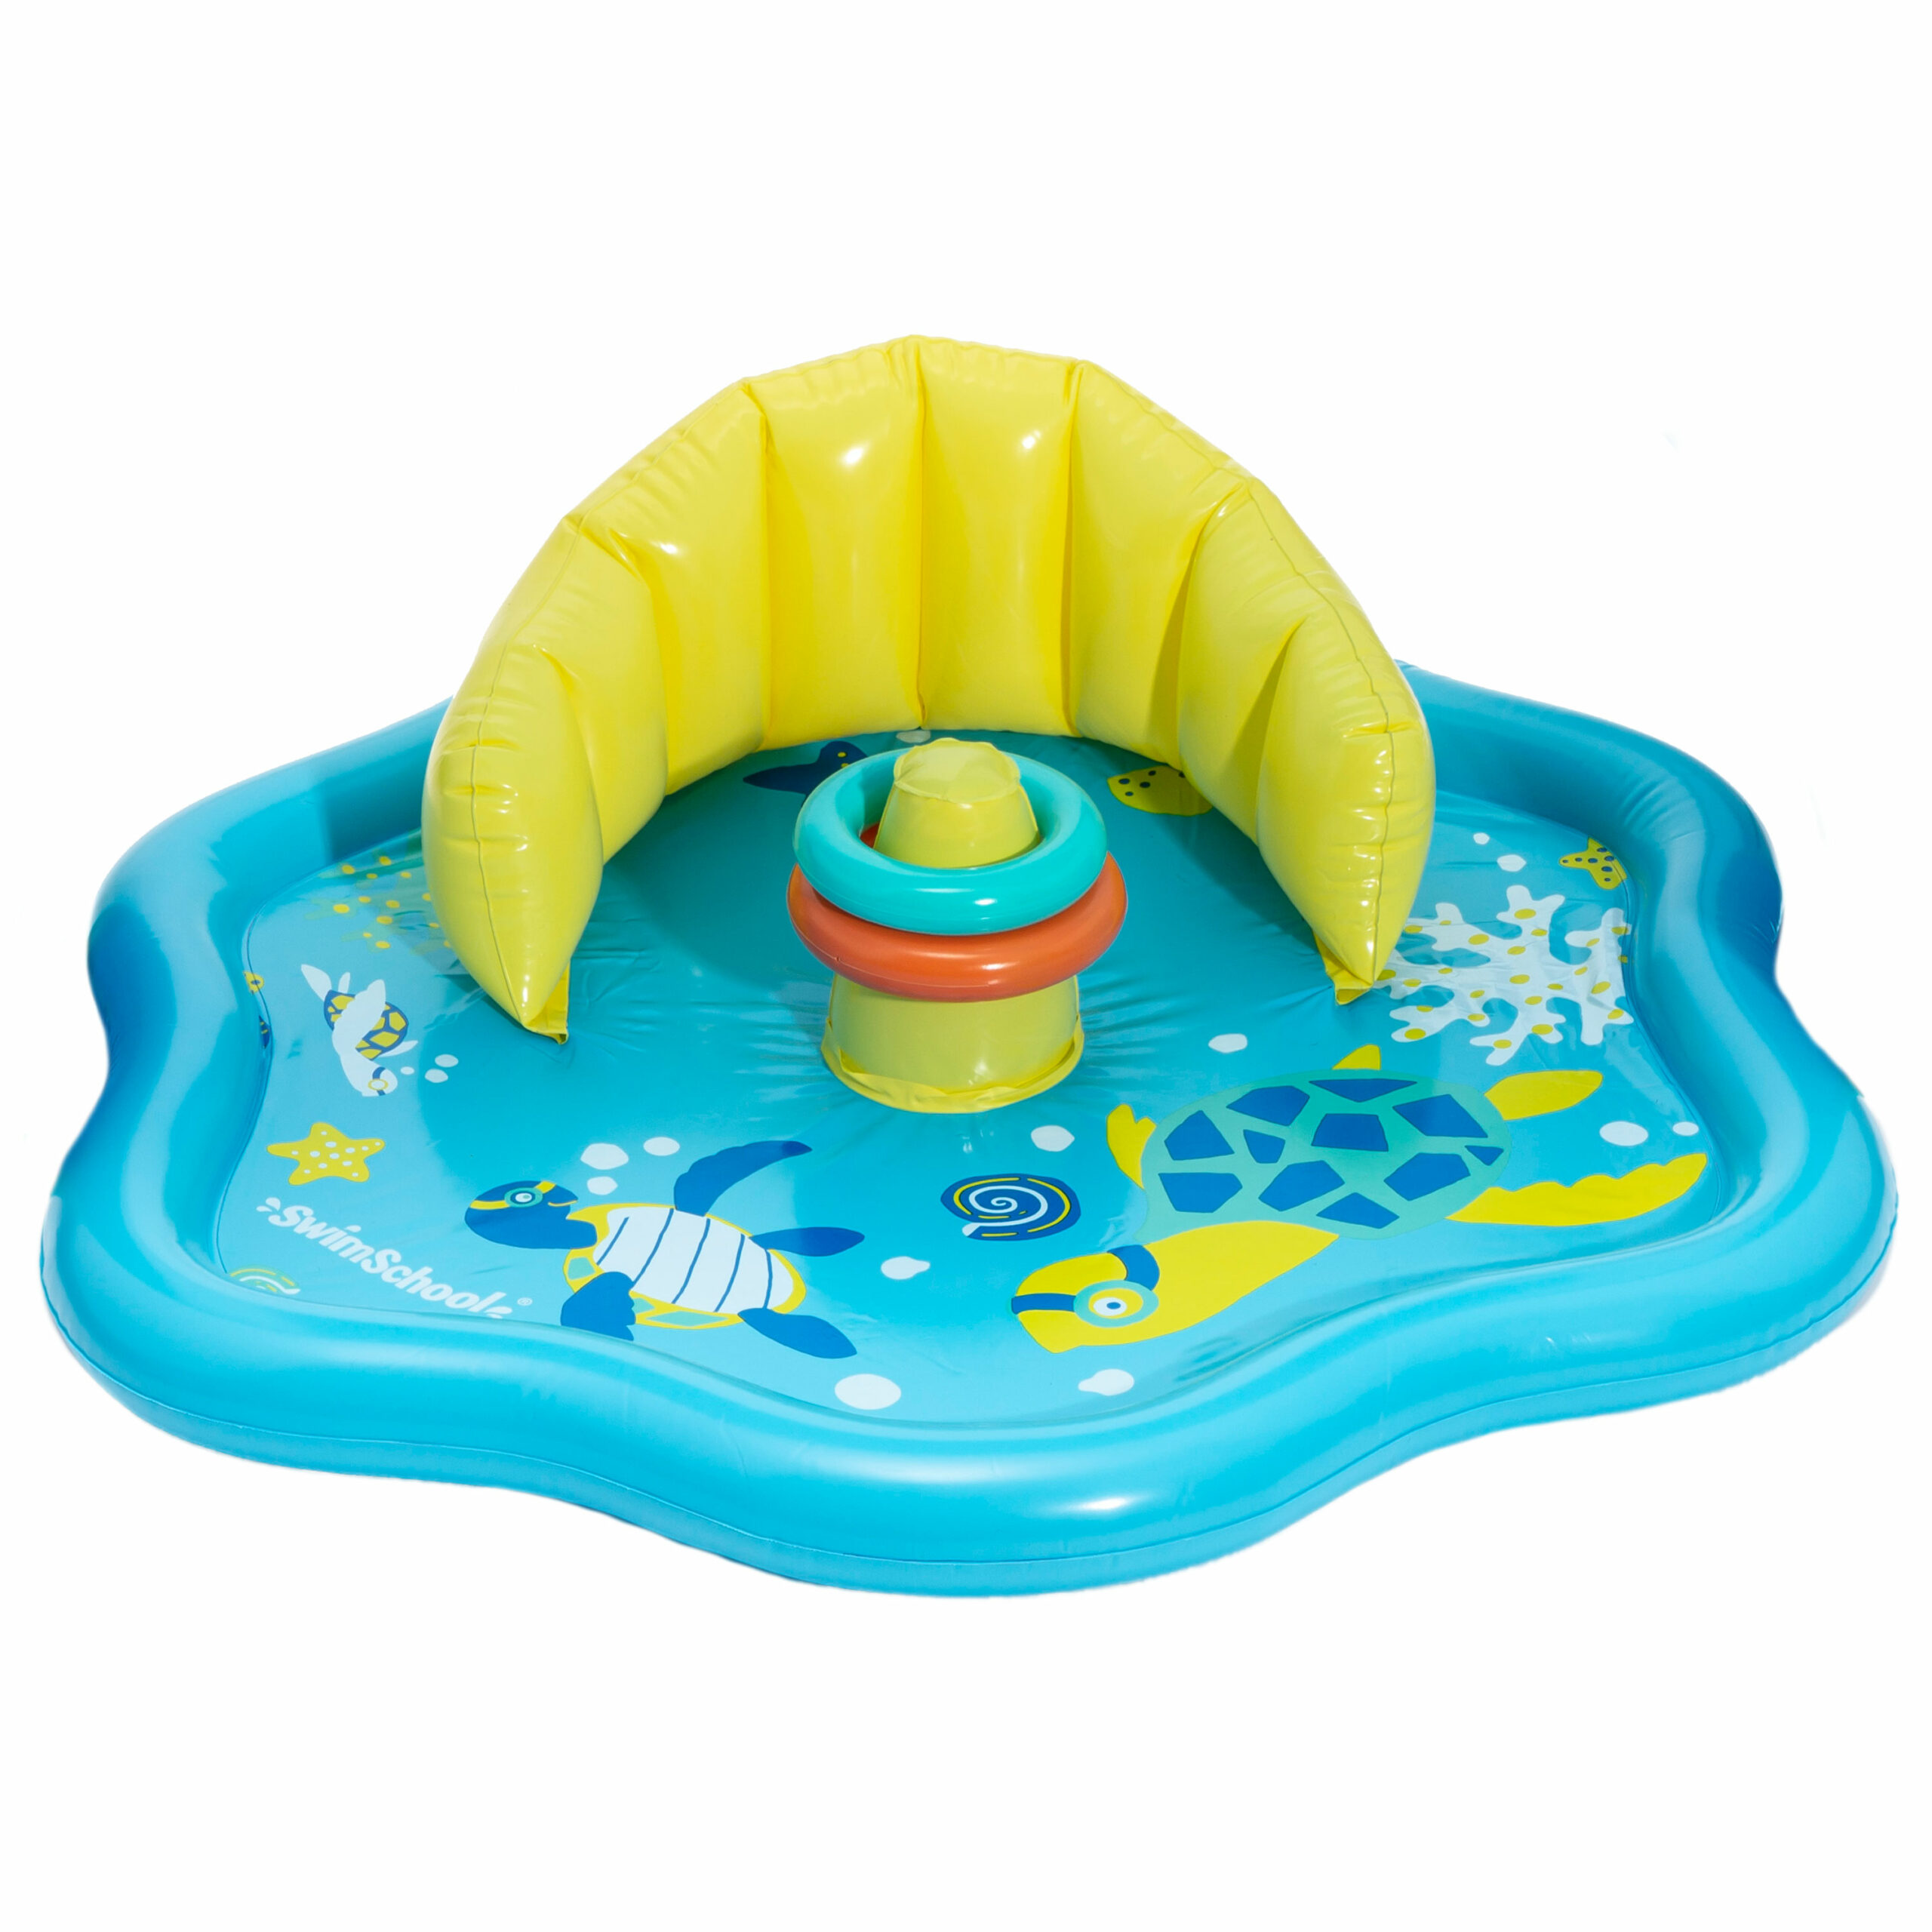 Aqua Leisure - Stack & Play Splash Play Mat | Inflatable Play Pool for Babies & Infants